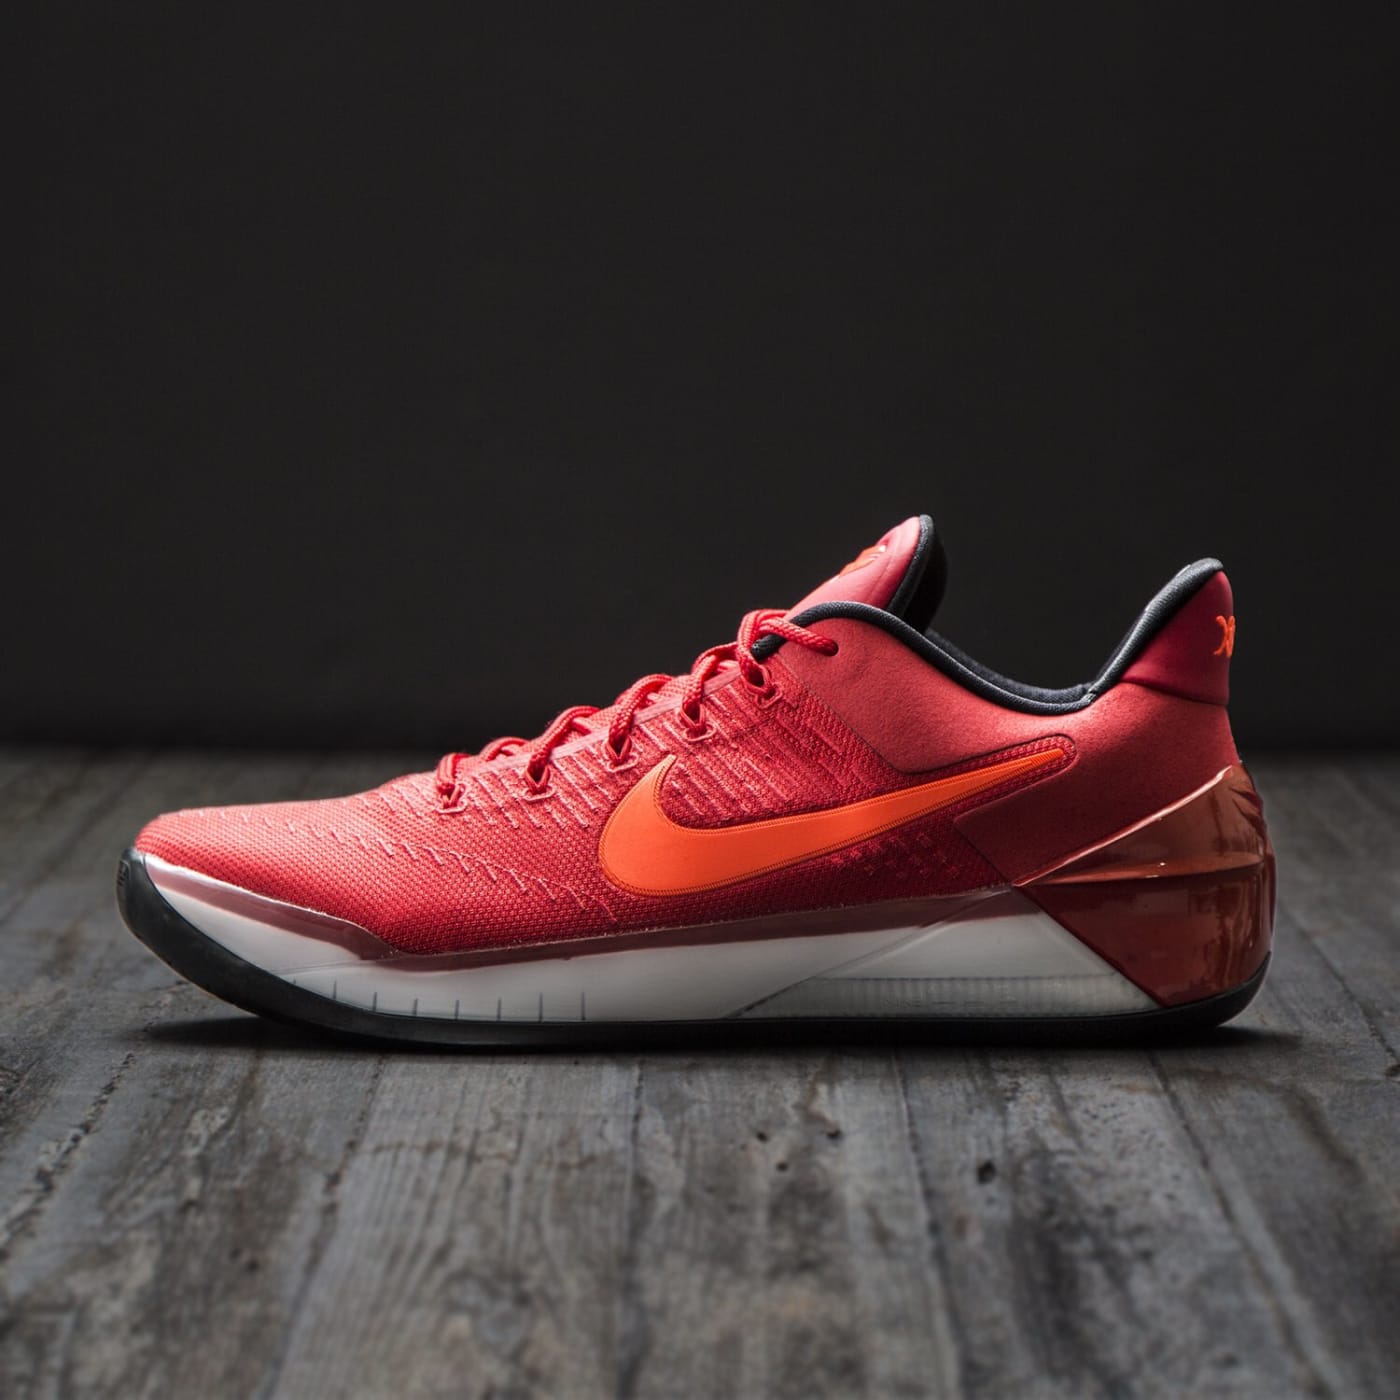 Nike Kobe AD University Red Release Date 852425-608 | Complex